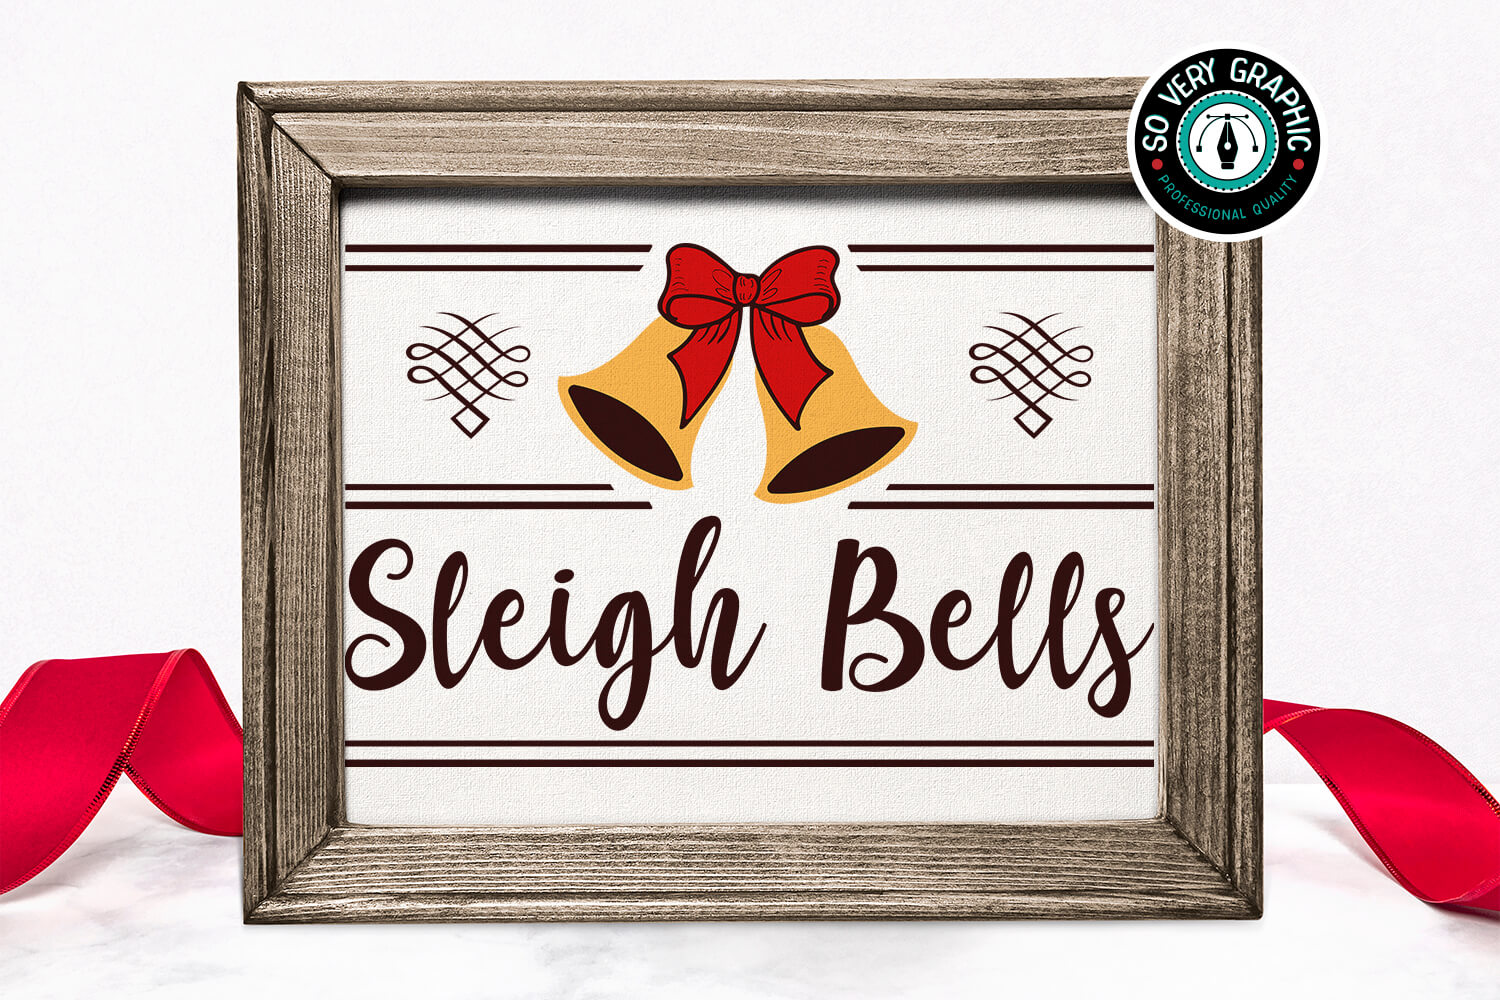 Our Christmas Sleigh Bells SVG Design is perfect for your Cricut crafting projects and small handmade businesses this holiday season!